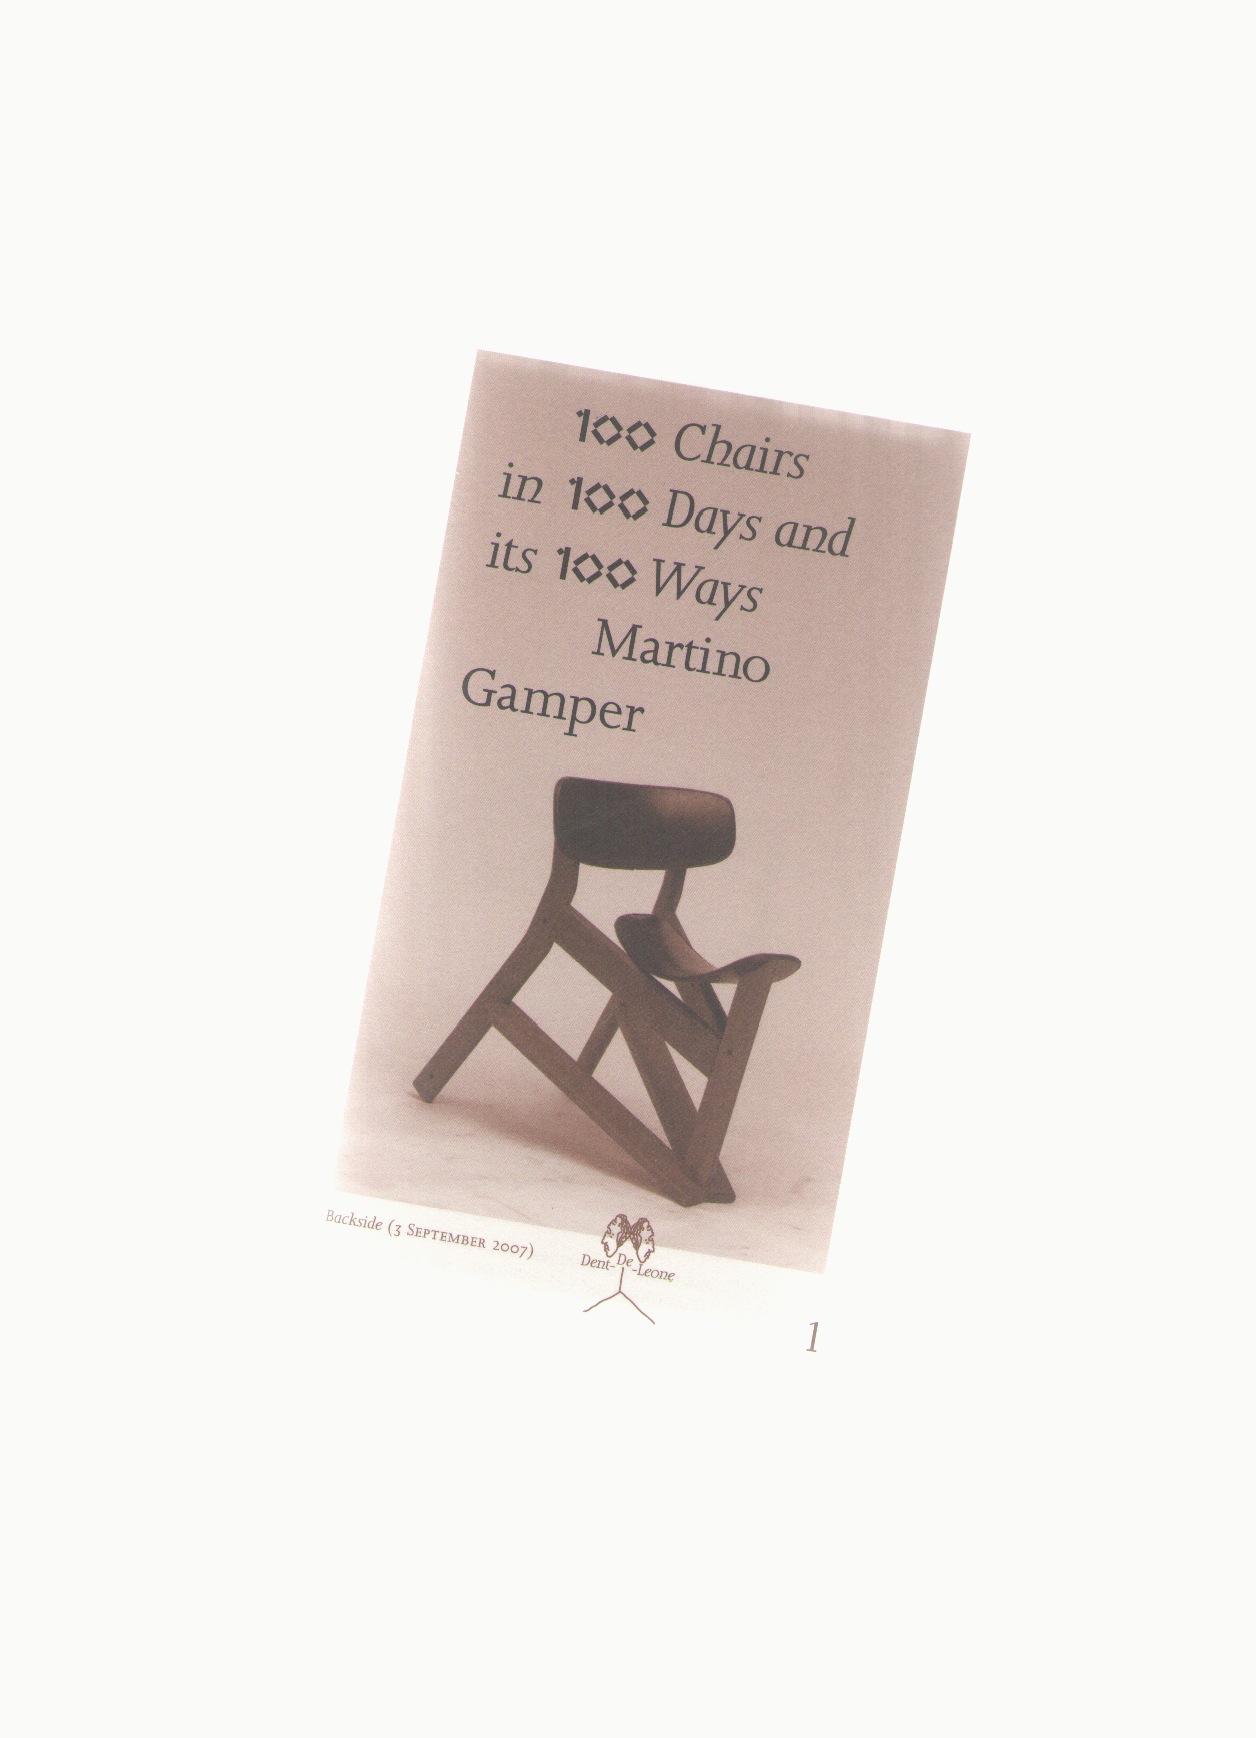 GAMPER, Martino - 100 Chairs in 100 Days and its 100 Ways [4th Edition]